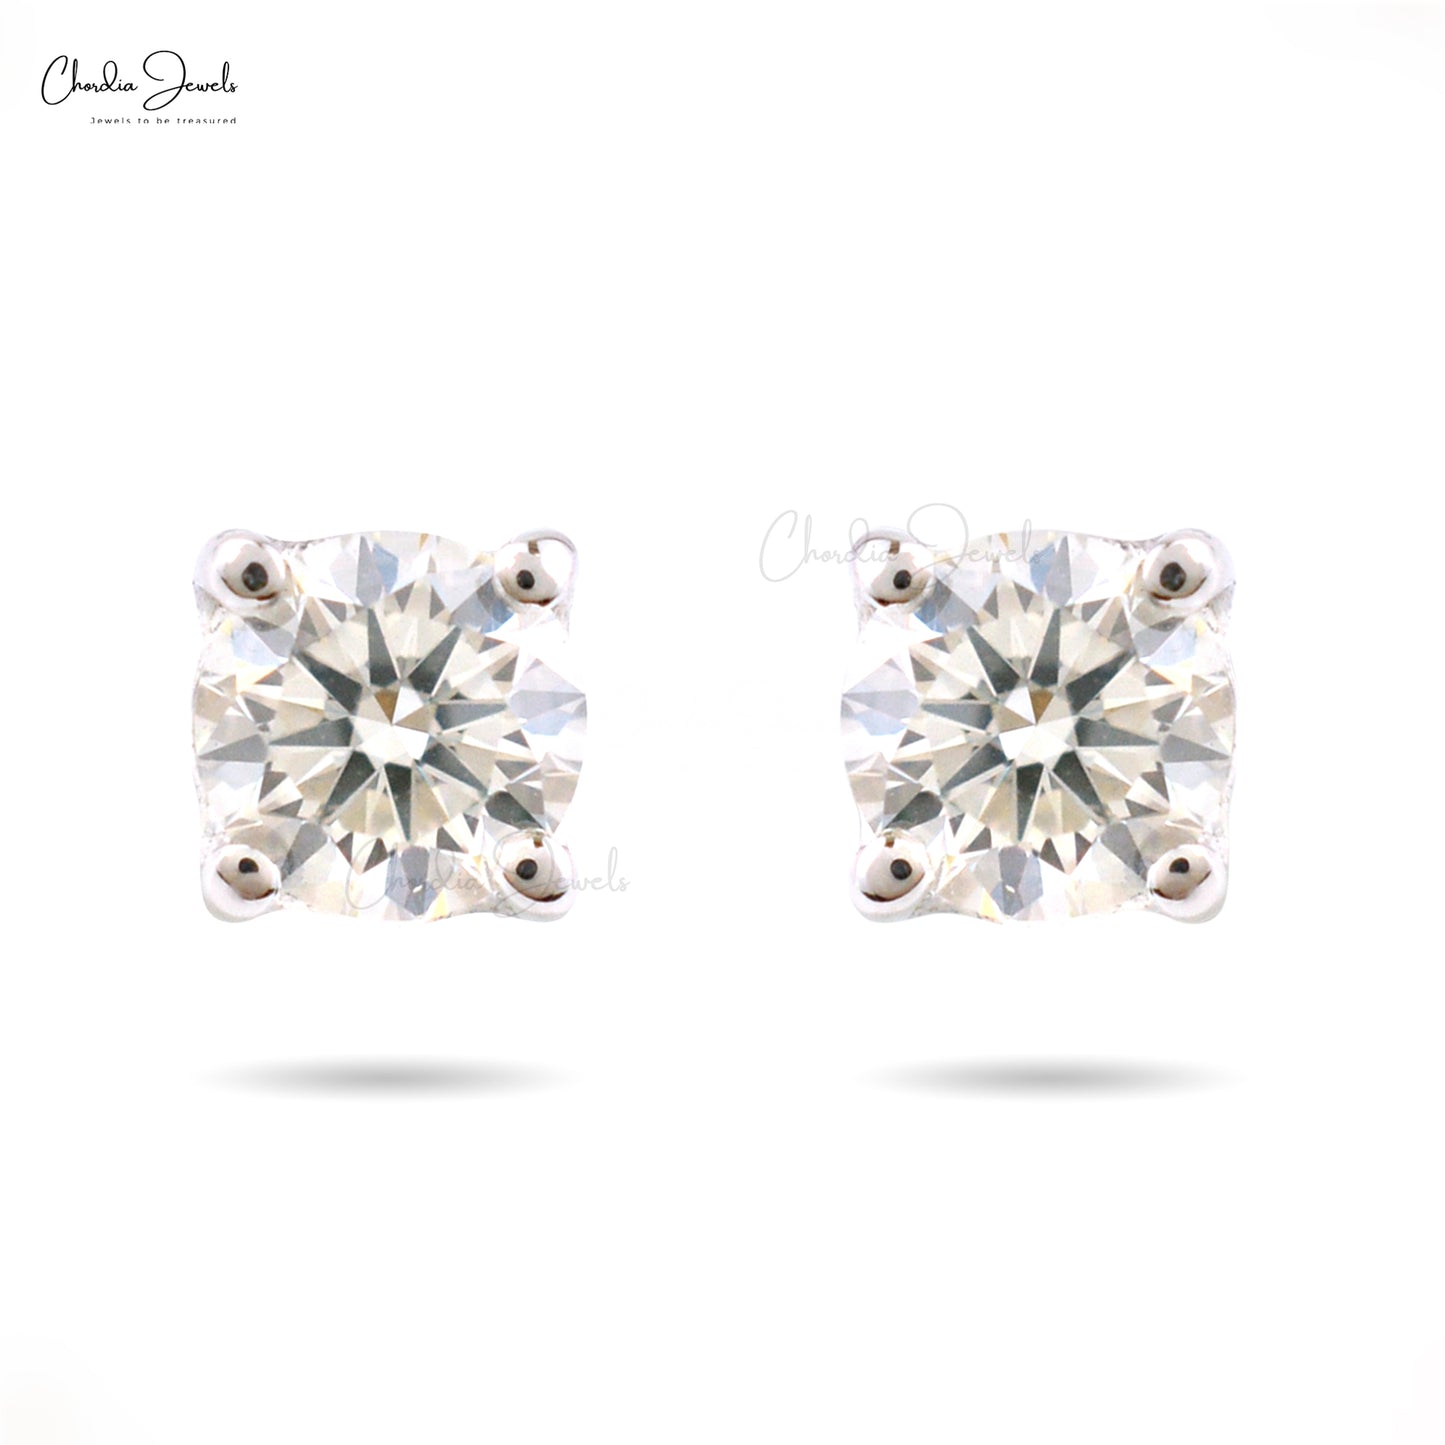 Certified Round Diamond Solitaire 14k White Gold Stud Earrings